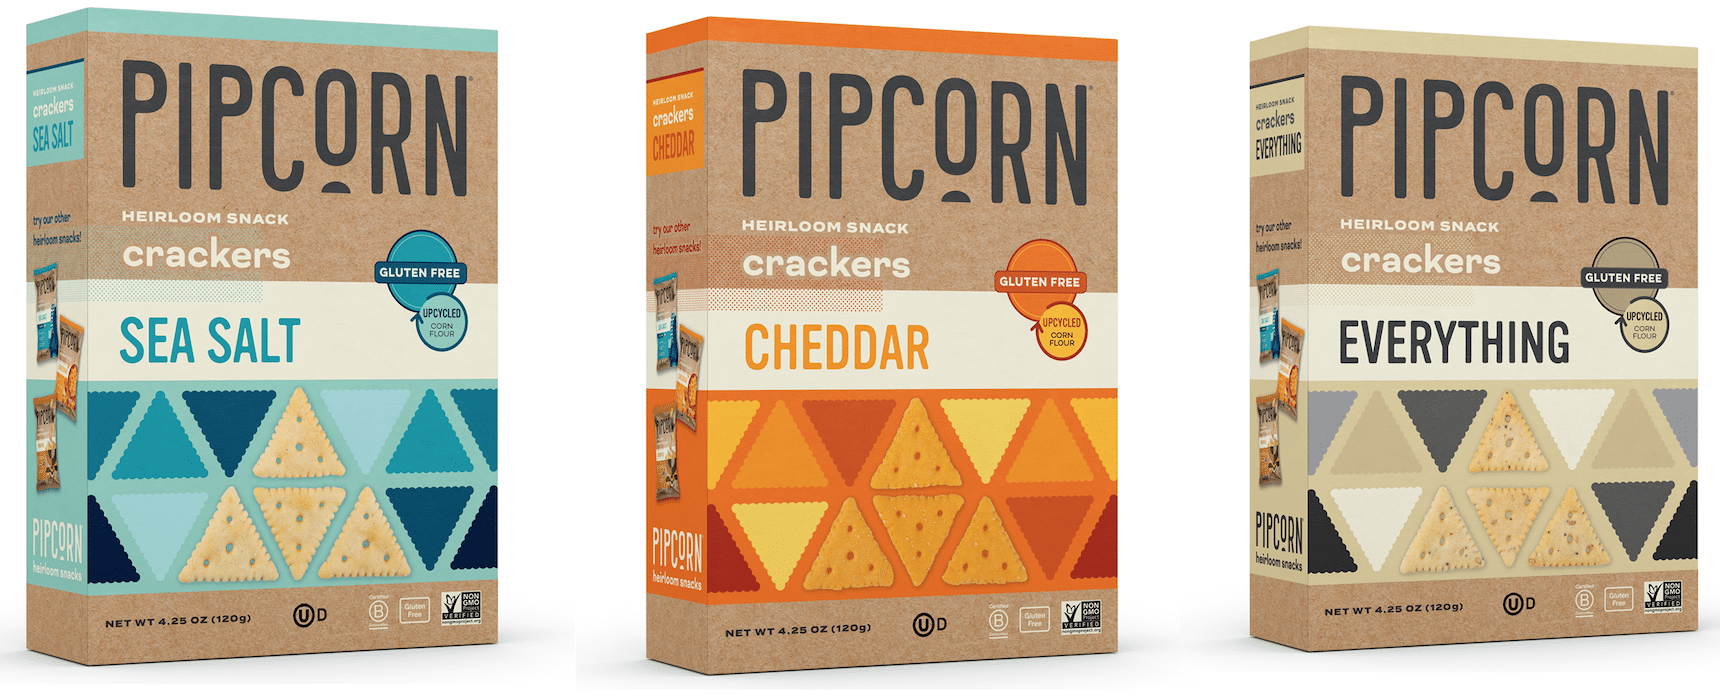 Pipcorn Launches New Heirloom Crackers, Announces Retail Expansion Into ...